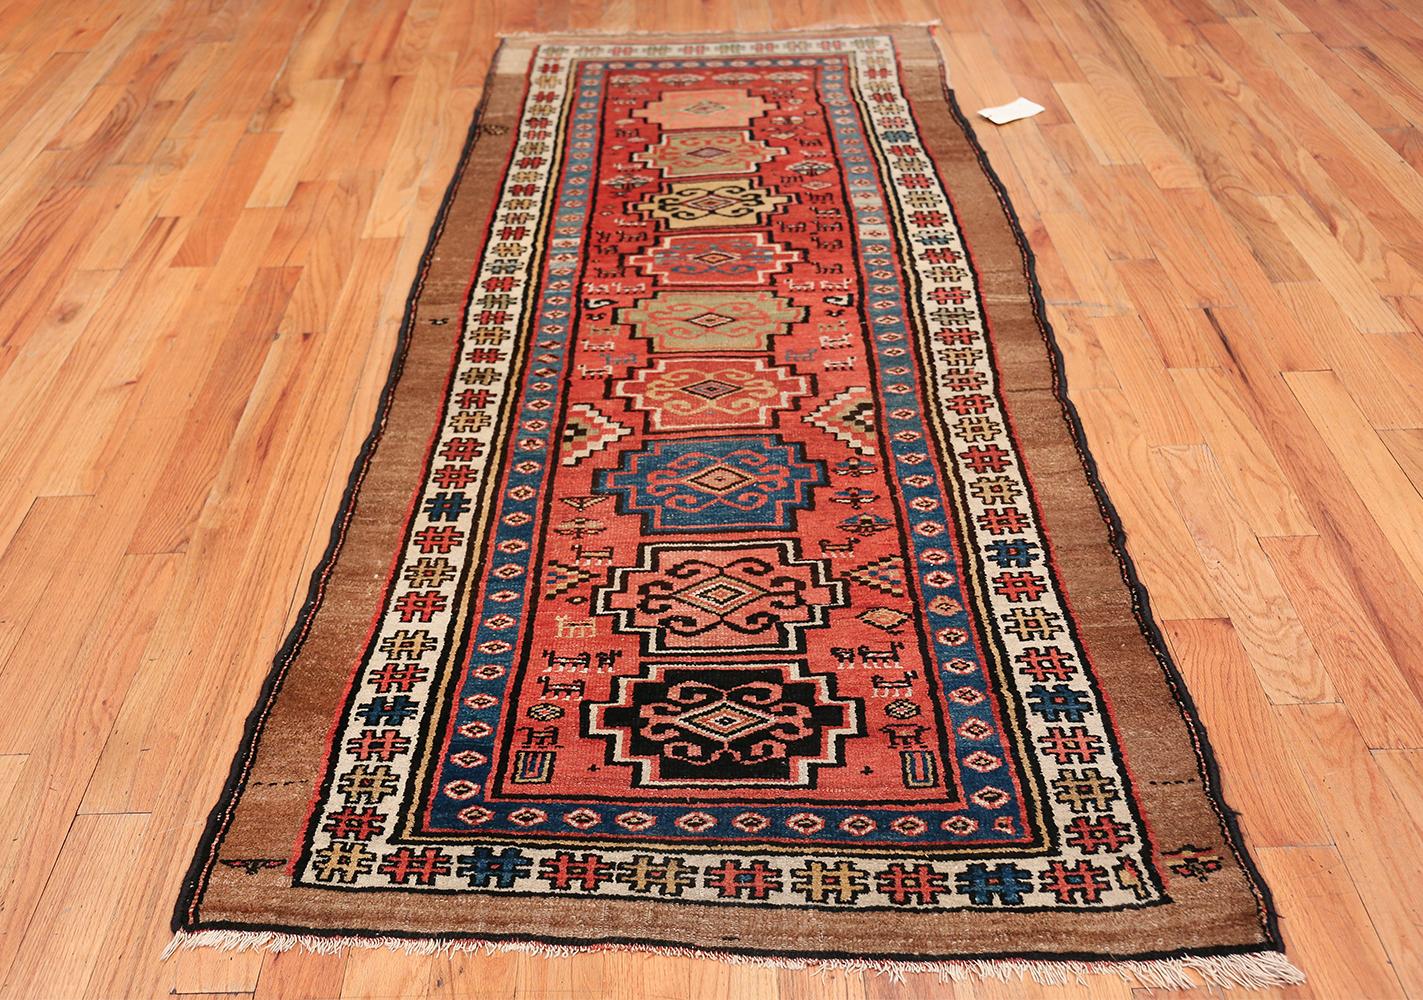 Antique Persian northwest rug, origin: Persia, circa 1920's. Size: 3 ft 6 in x 8 ft 4 in (1.07 m x 2.54 m)

Here is a an exciting and remarkable antique rug – an antique Northwest Persian carpet, woven in Persia during the second or third decade of